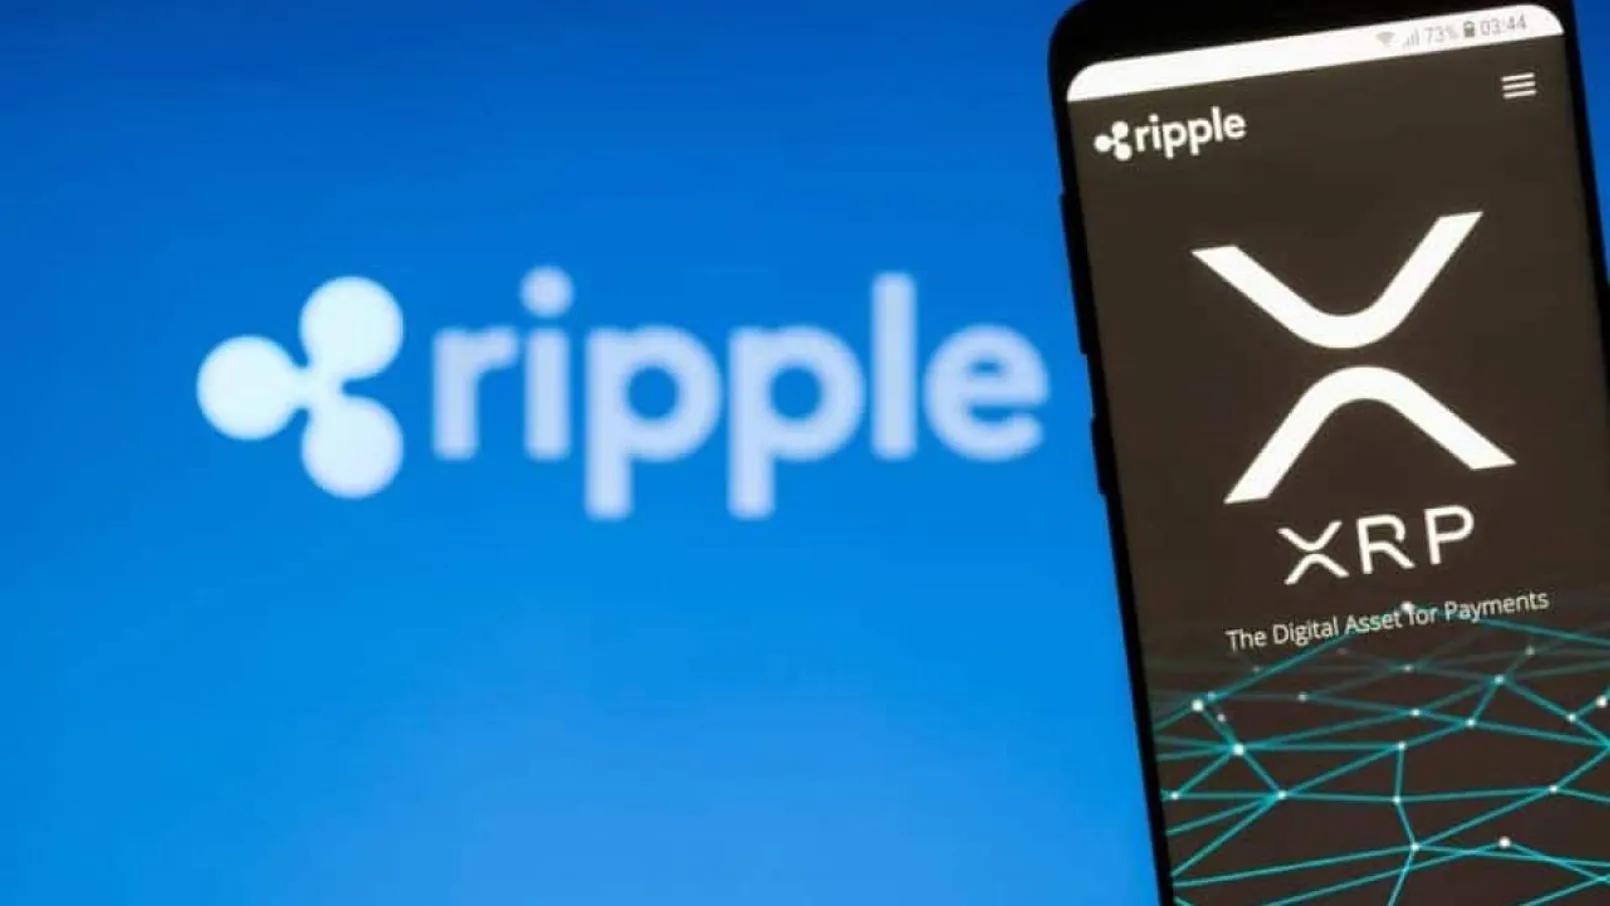 Ripple Global Expansion With X Rapid 960x640 1280x720 1.jpg